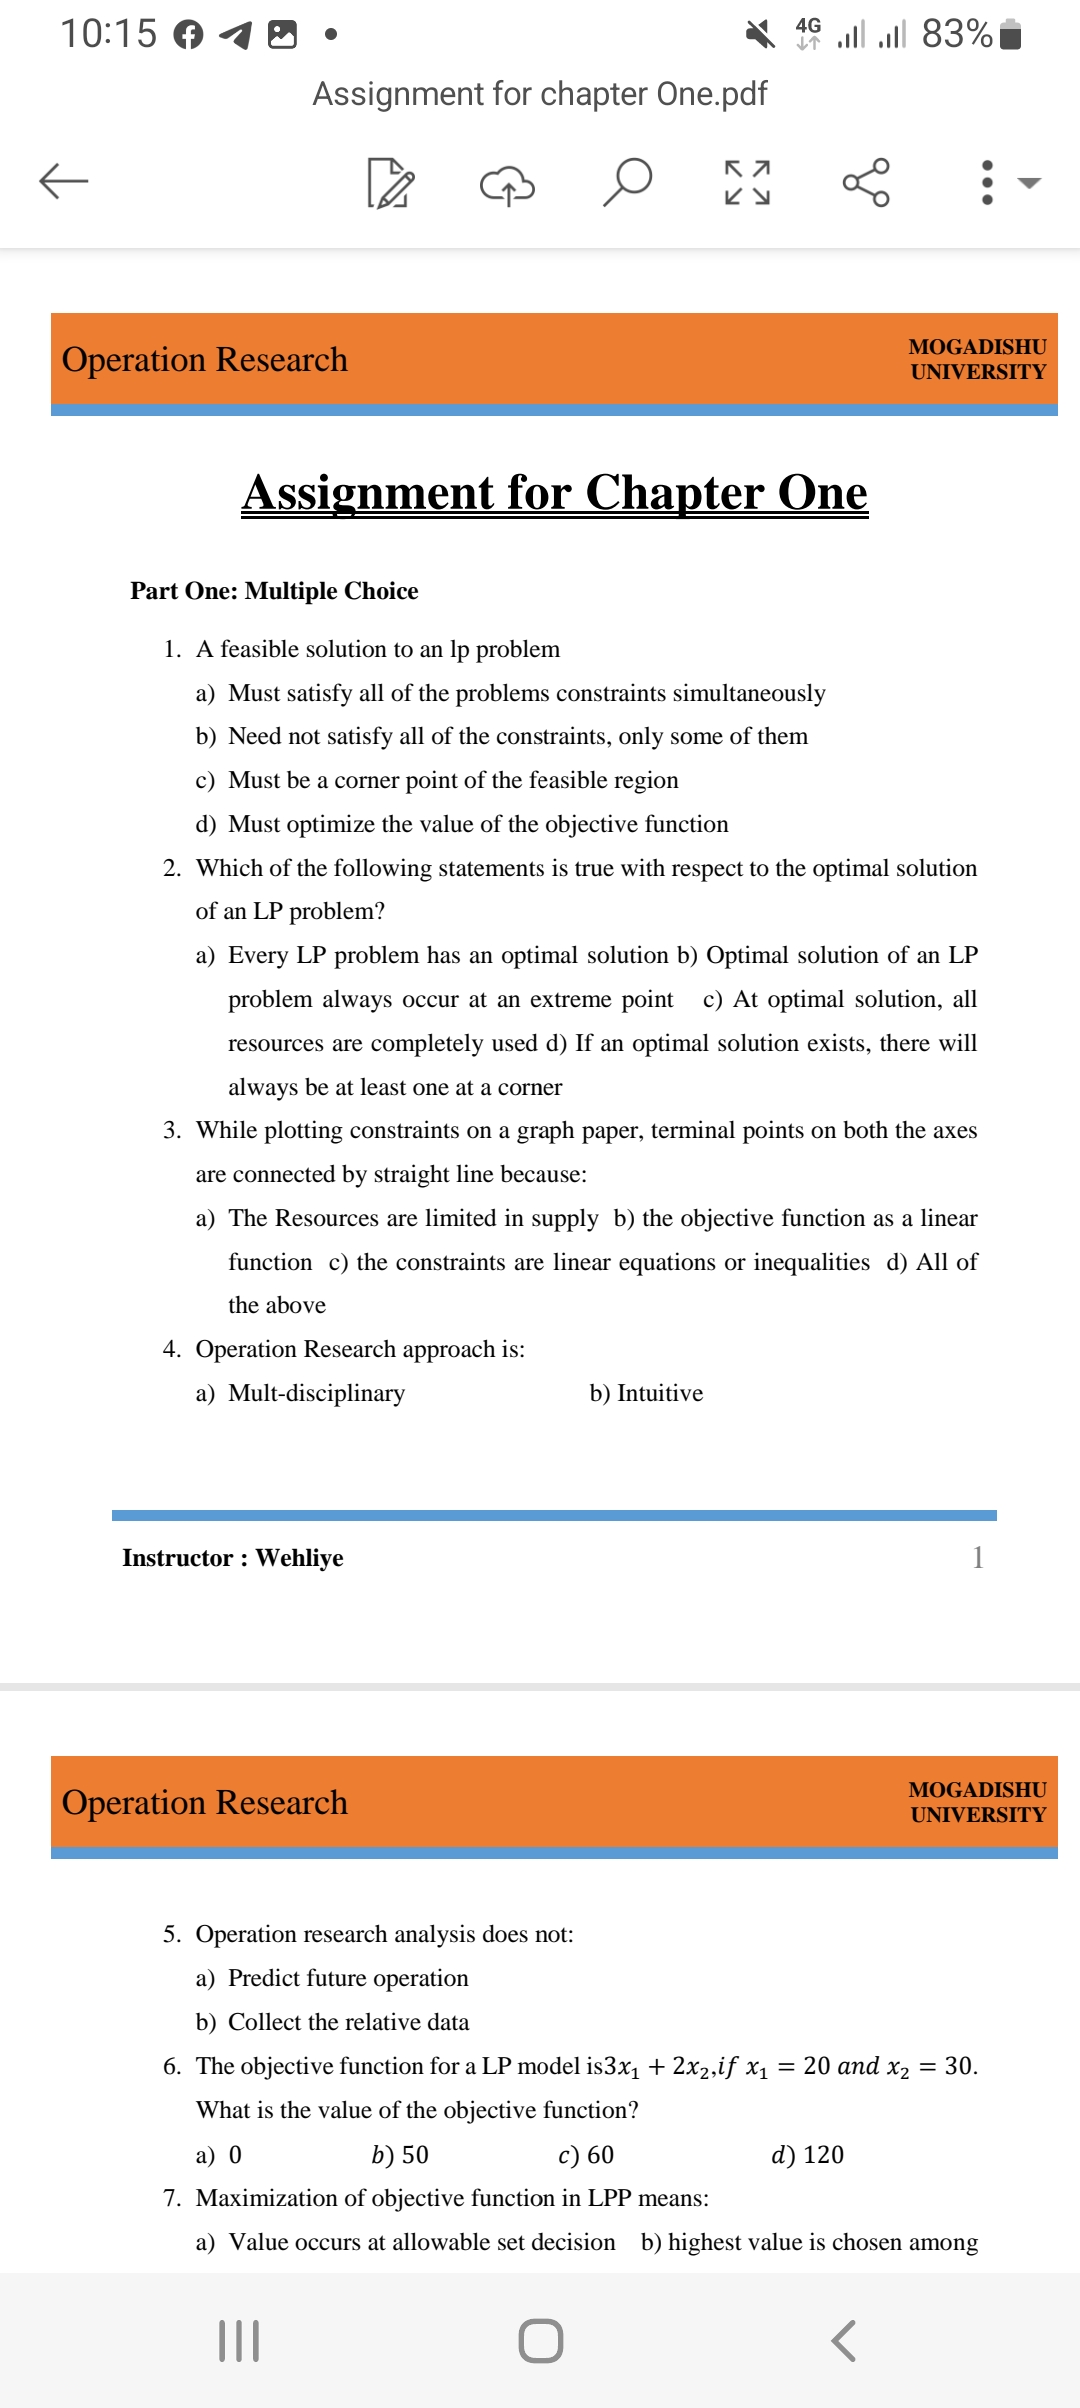 10:15
←
Assignment for chapter One.pdf
Operation Research
Assignment for Chapter One
Instructor: Wehliye
Operation Research
K 7
ку
5. Operation research analysis does not:
a) Predict future operation
b) Collect the relative data
4G 83%
个
Part One: Multiple Choice
1. A feasible solution to an lp problem
a) Must satisfy all of the problems constraints simultaneously
b) Need not satisfy all of the constraints, only some of them
c) Must be a corner point of the feasible region
d) Must optimize the value of the objective function
2. Which of the following statements is true with respect to the optimal solution
of an LP problem?
|||
L
a) Every LP problem has an optimal solution b) Optimal solution of an LP
problem always occur at an extreme point c) At optimal solution, all
resources are completely used d) If an optimal solution exists, there will
always be at least one at a corner
3. While plotting constraints on a graph paper, terminal points on both the axes
are connected by straight line because:
a) The Resources are limited in supply b) the objective function as a linear
function c) the constraints are linear equations or inequalities d) All of
the above
4. Operation Research approach is:
a) Mult-disciplinary
b) Intuitive
:
MOGADISHU
UNIVERSITY
d) 120
<
6. The objective function for a LP model is3x₁ + 2x₂,if x₁ = 20 and x₂ = 30.
What is the value of the objective function?
a) 0
b) 50
c) 60
7. Maximization of objective function in LPP means:
a) Value occurs at allowable set decision b) highest value is chosen among
1
MOGADISHU
UNIVERSITY